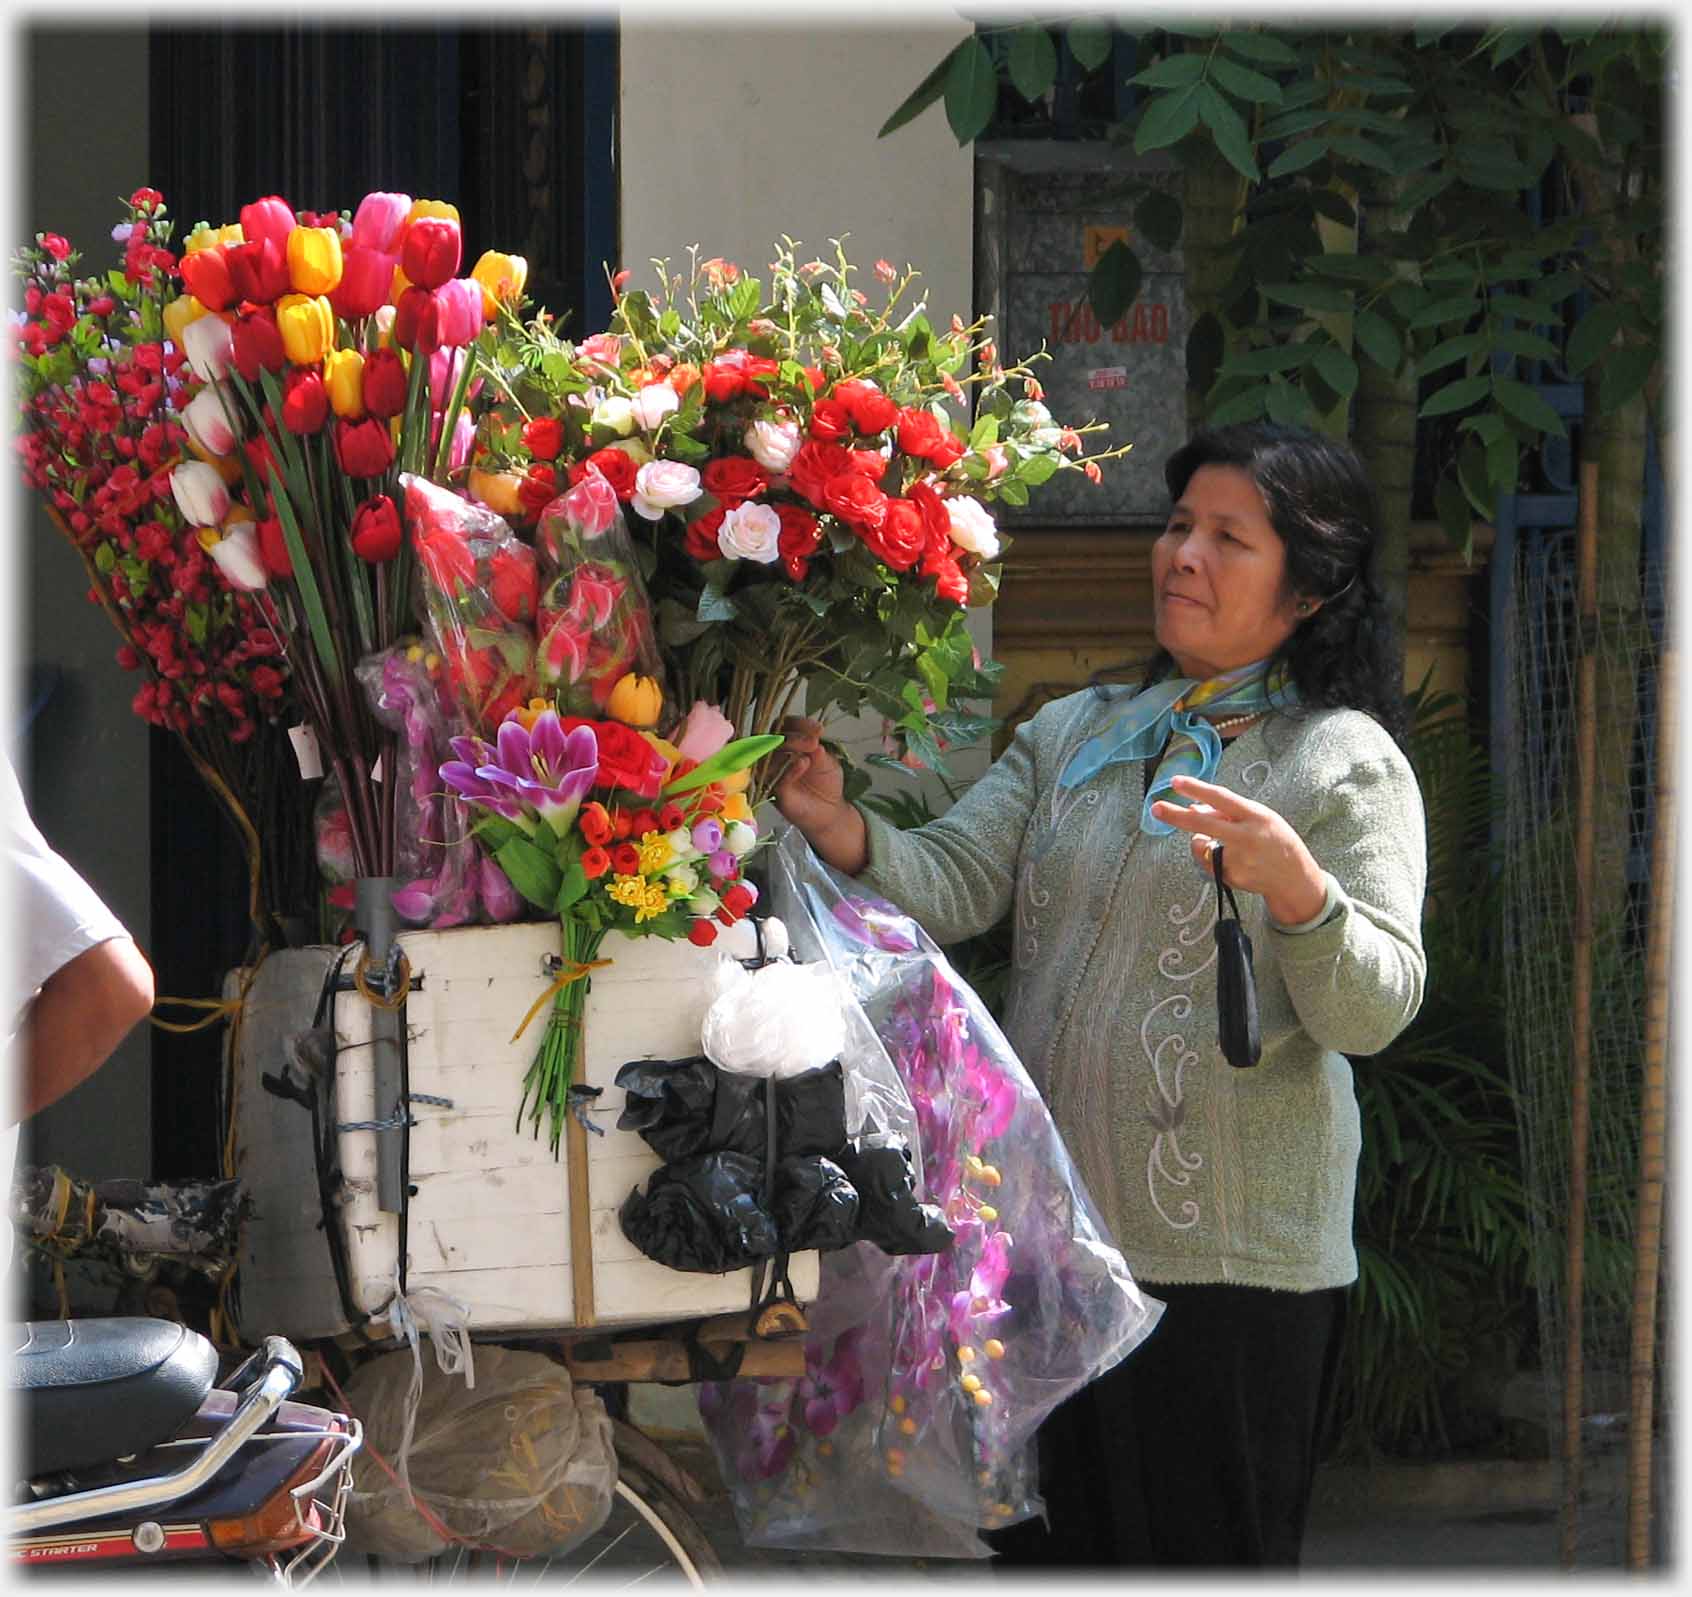 Woman beside bunches of flowers on a bicycle.